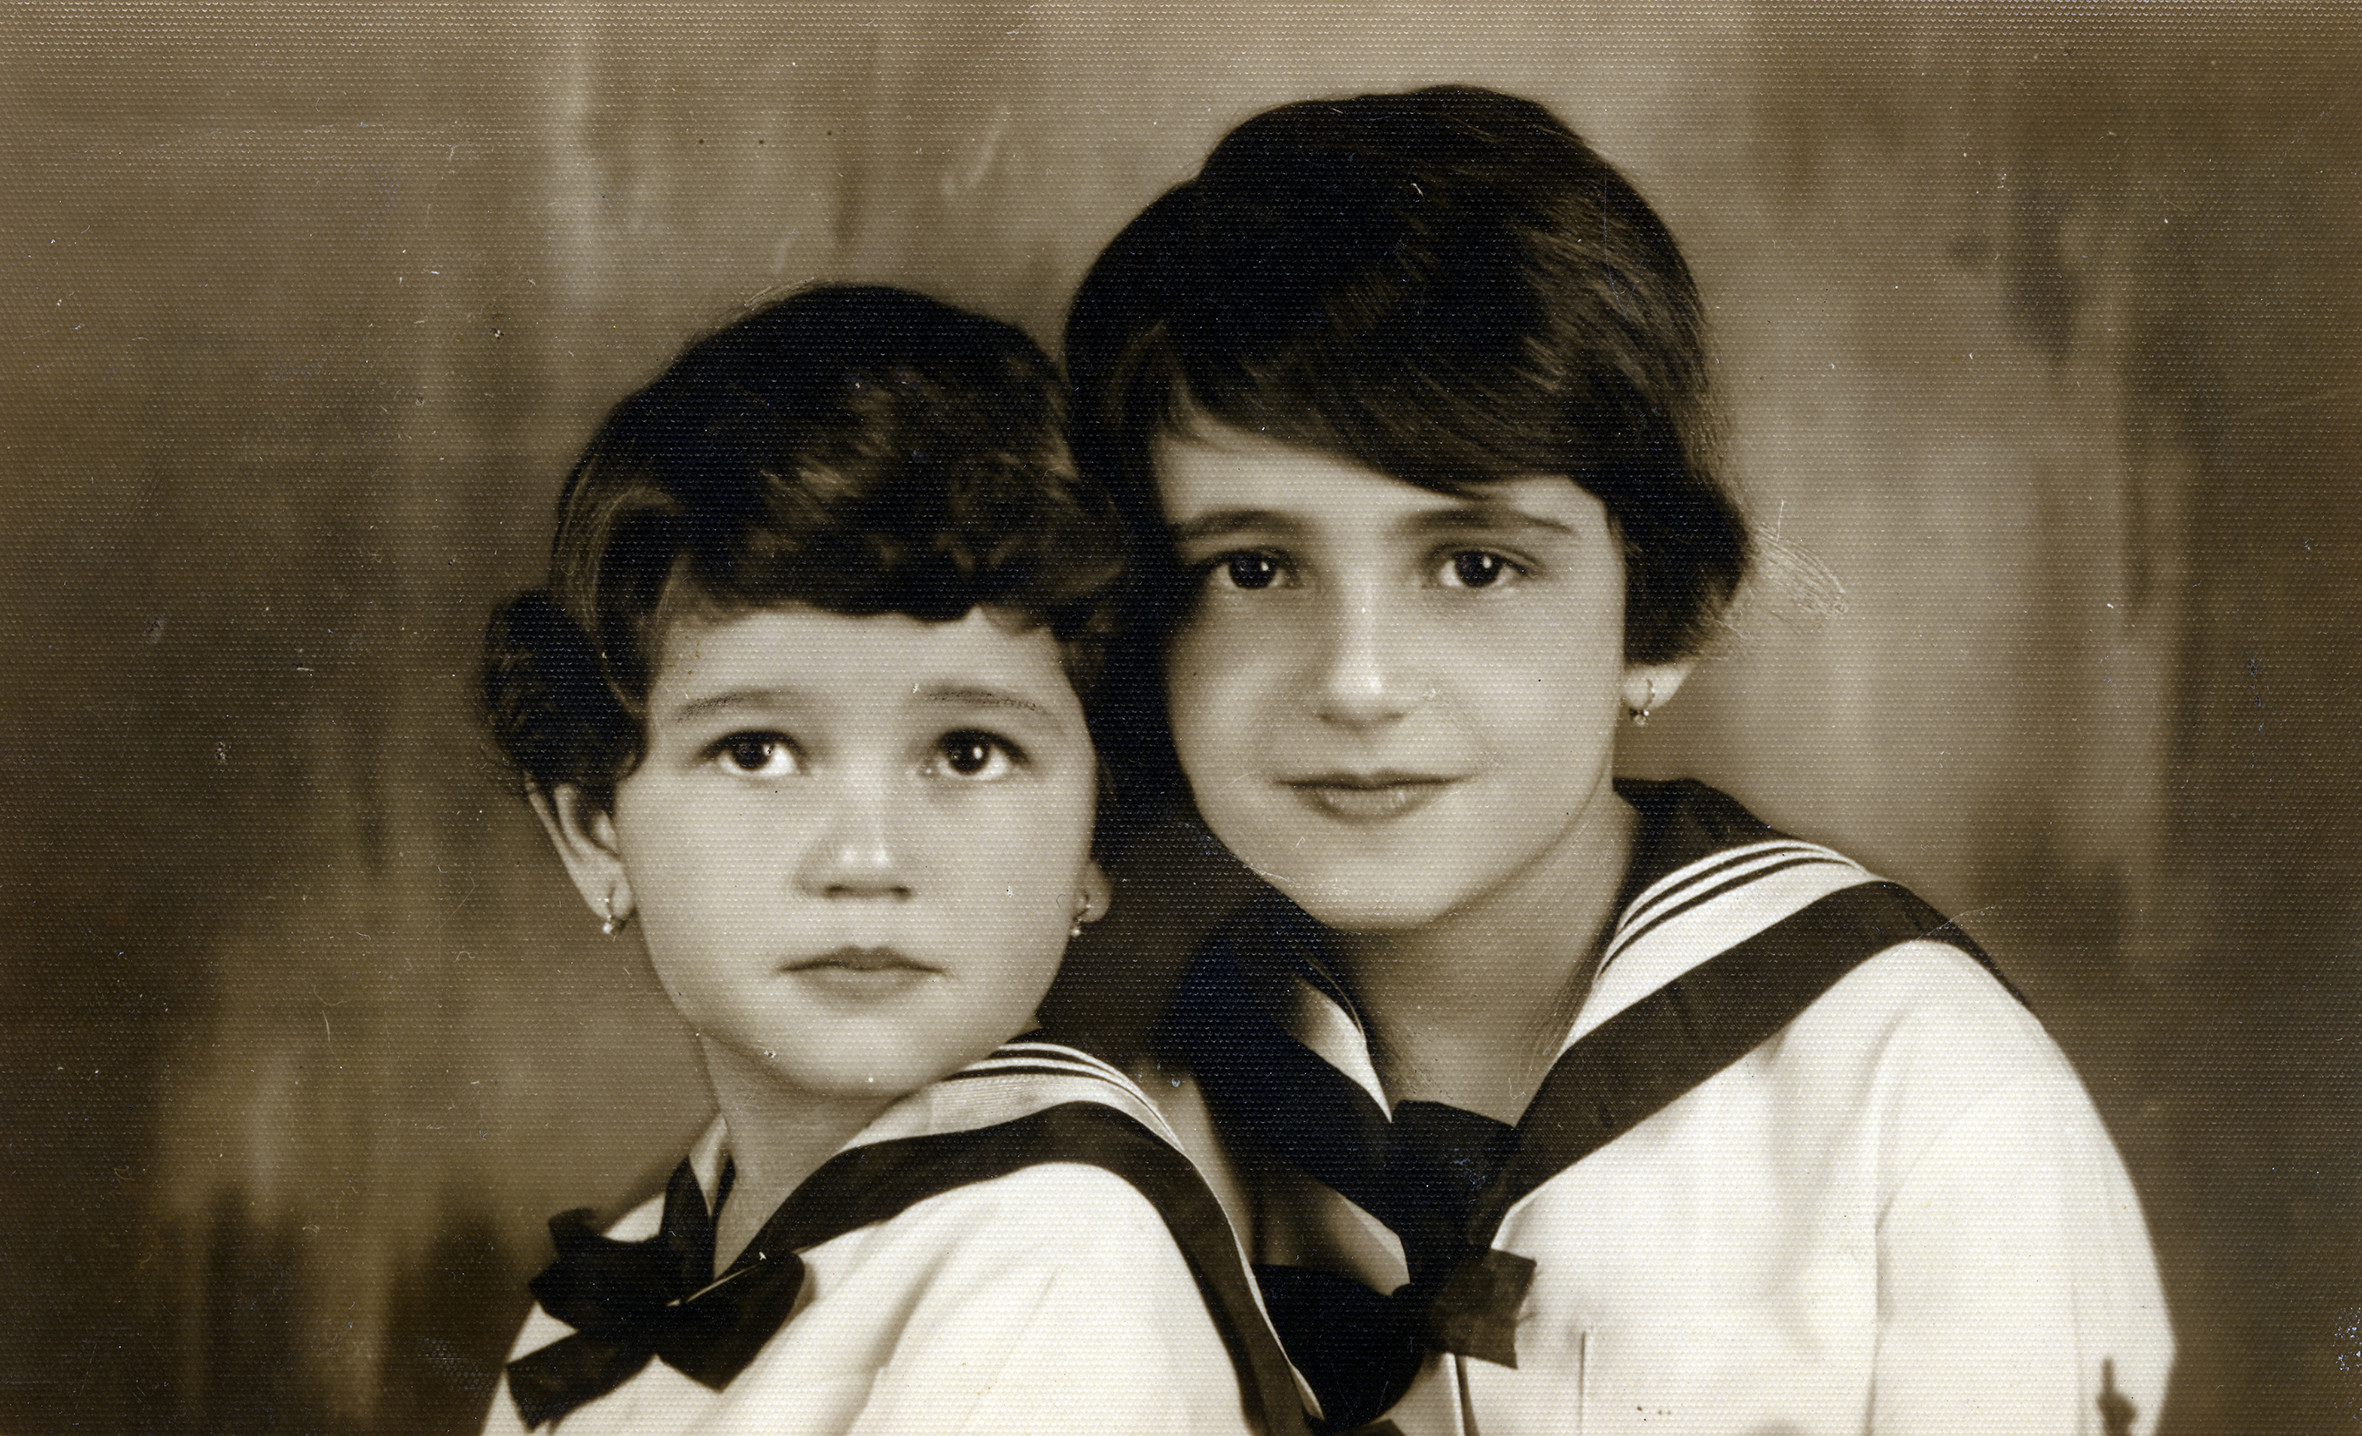 Studio portrait of Hungarian Jewish sisters.

Pictured are Susan (Suzsi) and Georgina (Gyorgyi) Fehrer.